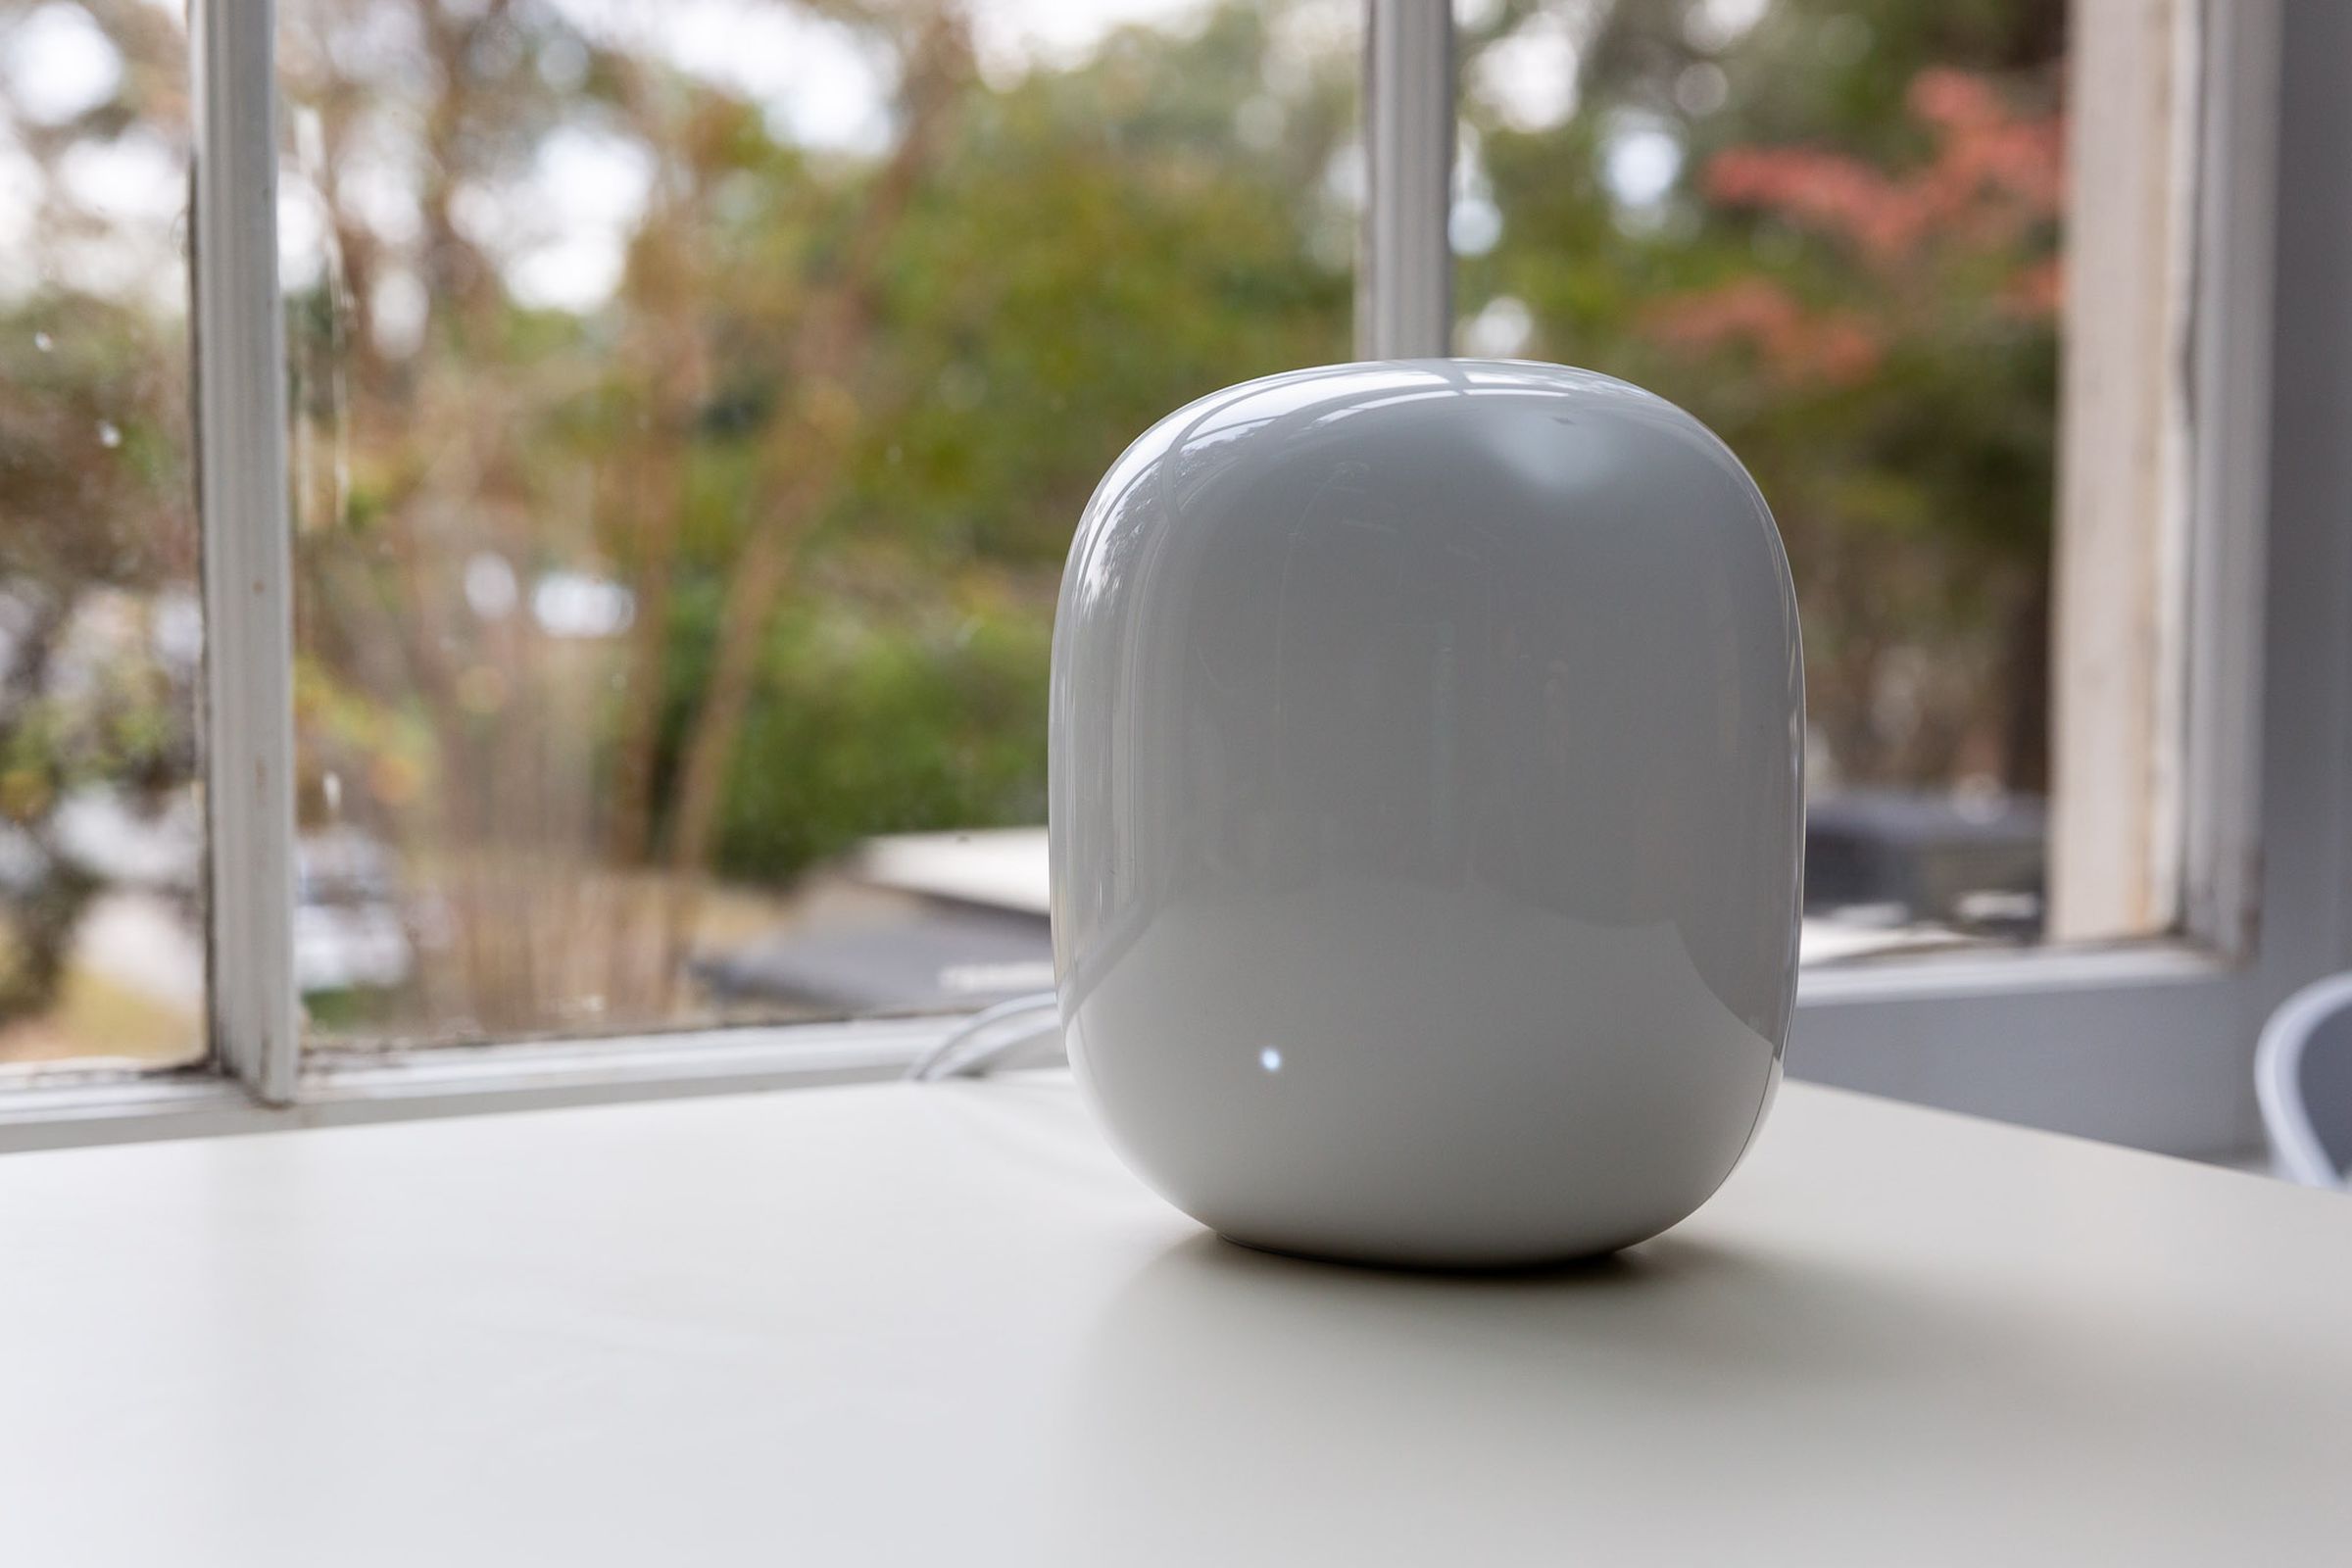 White Google Nest Wifi Pro router on a white table, in front of a window.